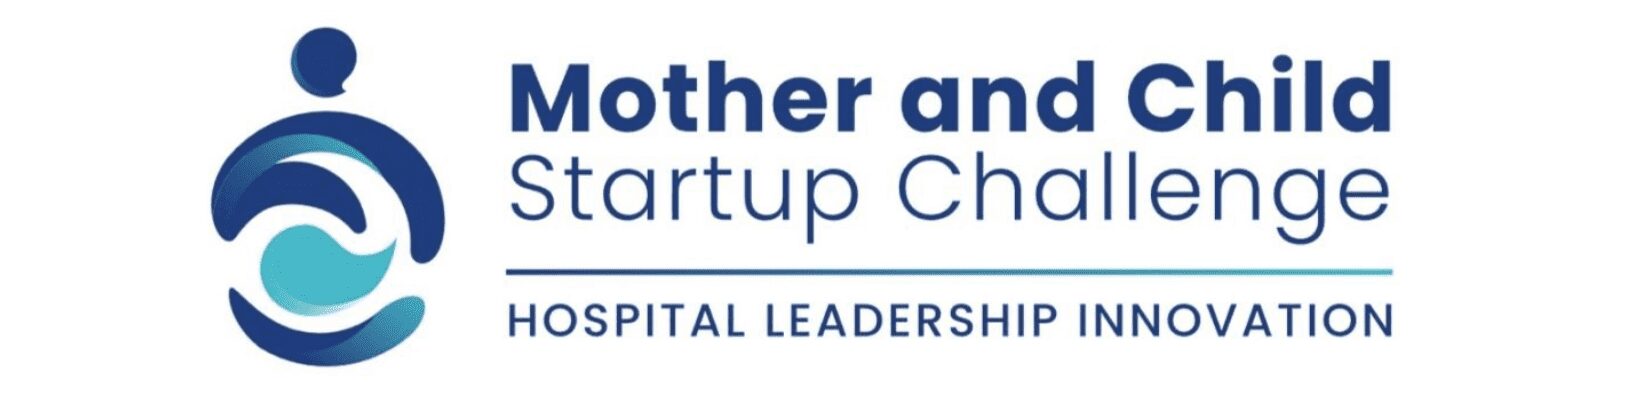 Mother and Child Startup Challenge